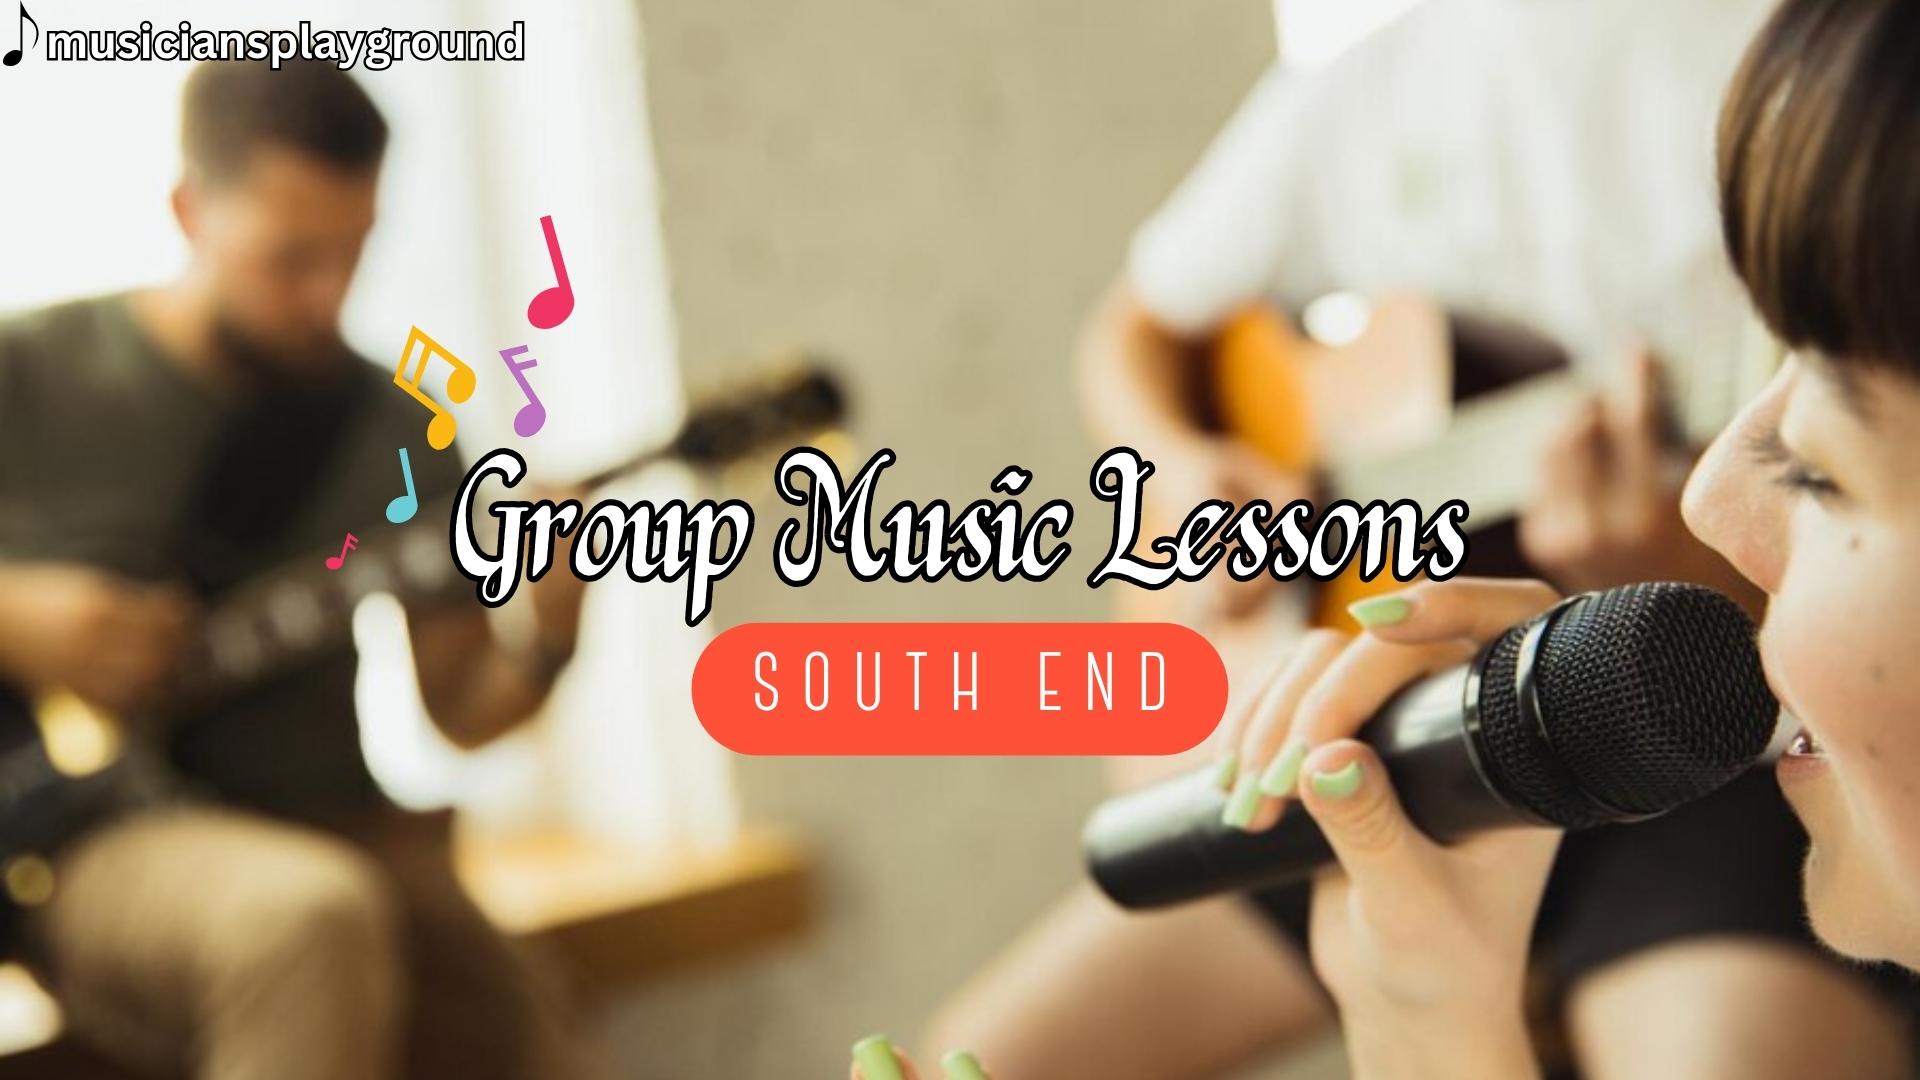 Welcome to Musicians Playground: Group Music Lessons in South End, Massachusetts